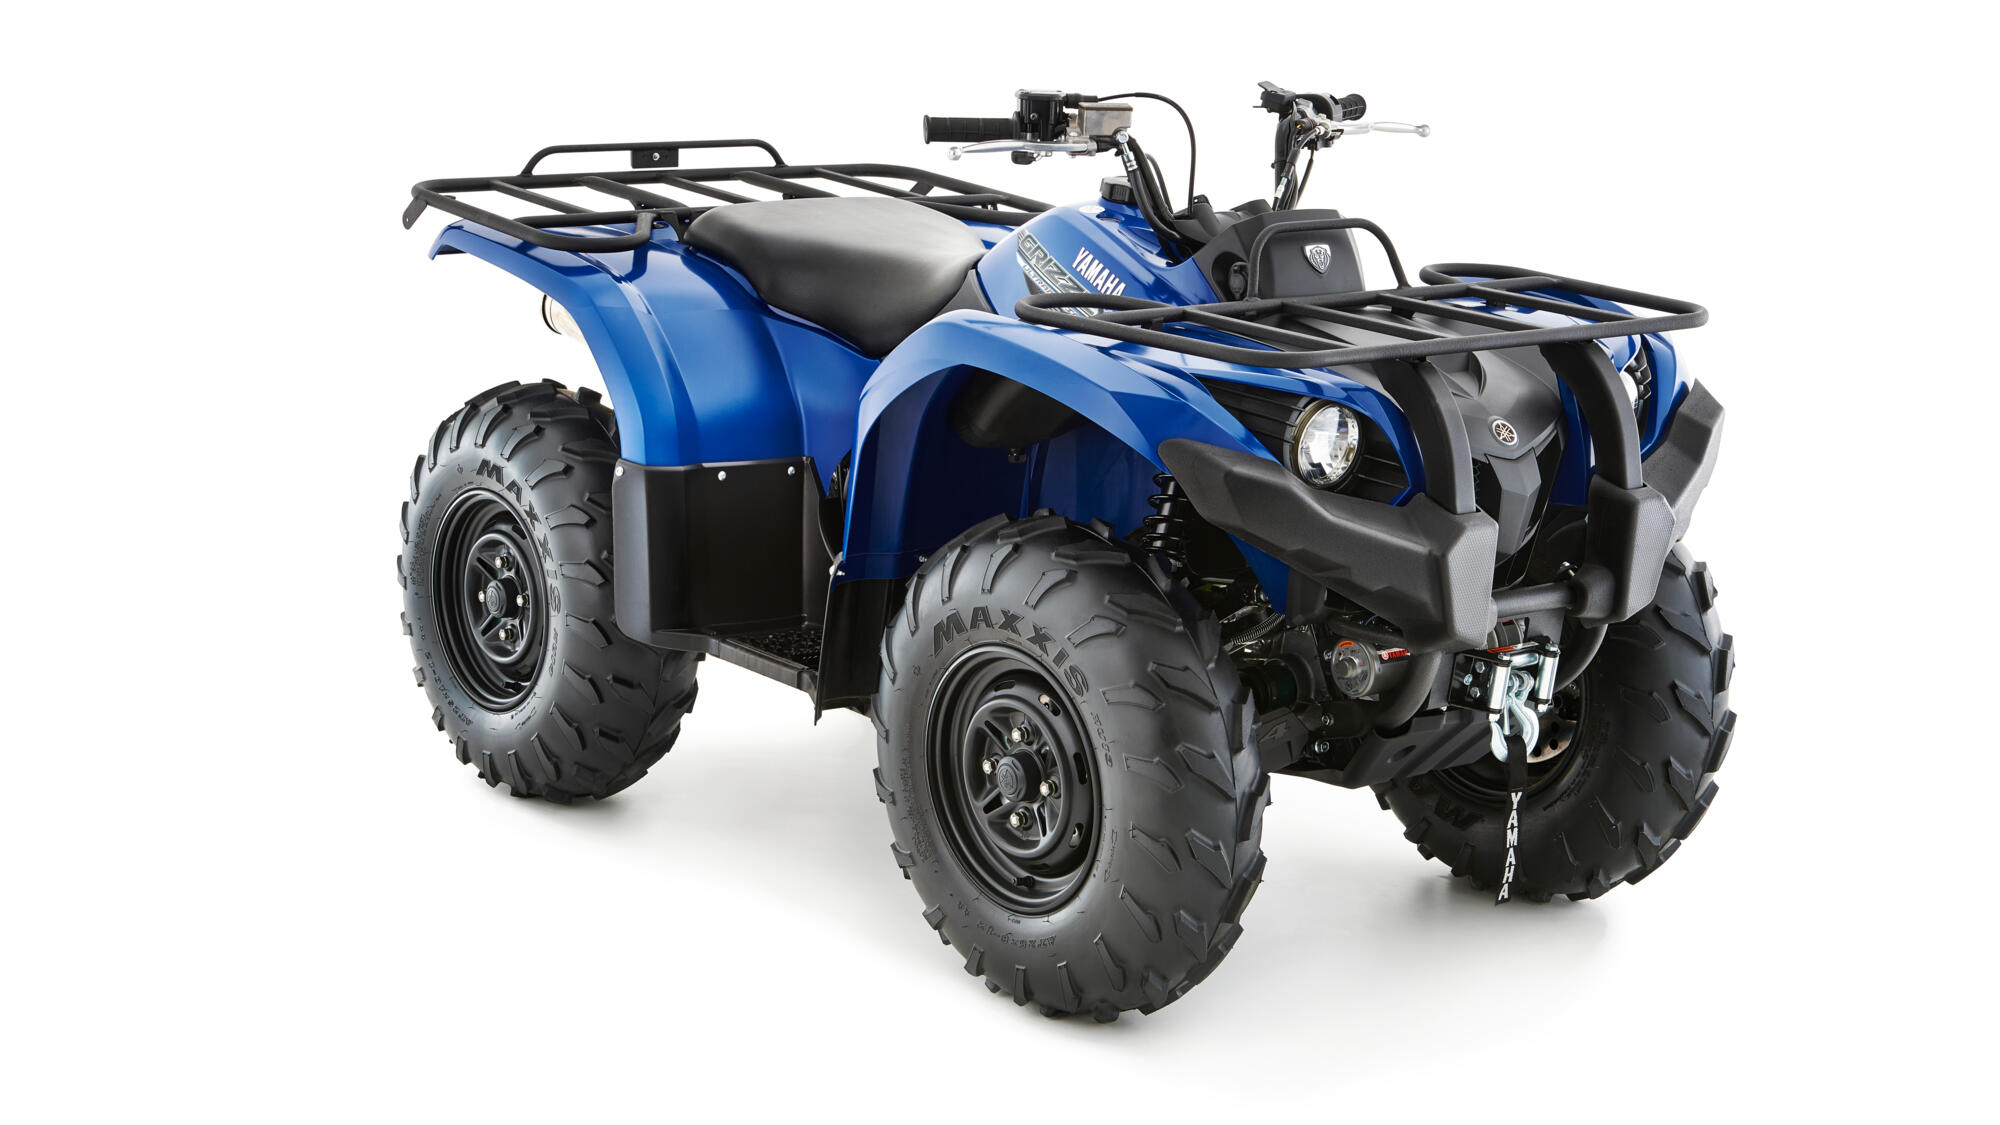 Grizzly 450 IRS